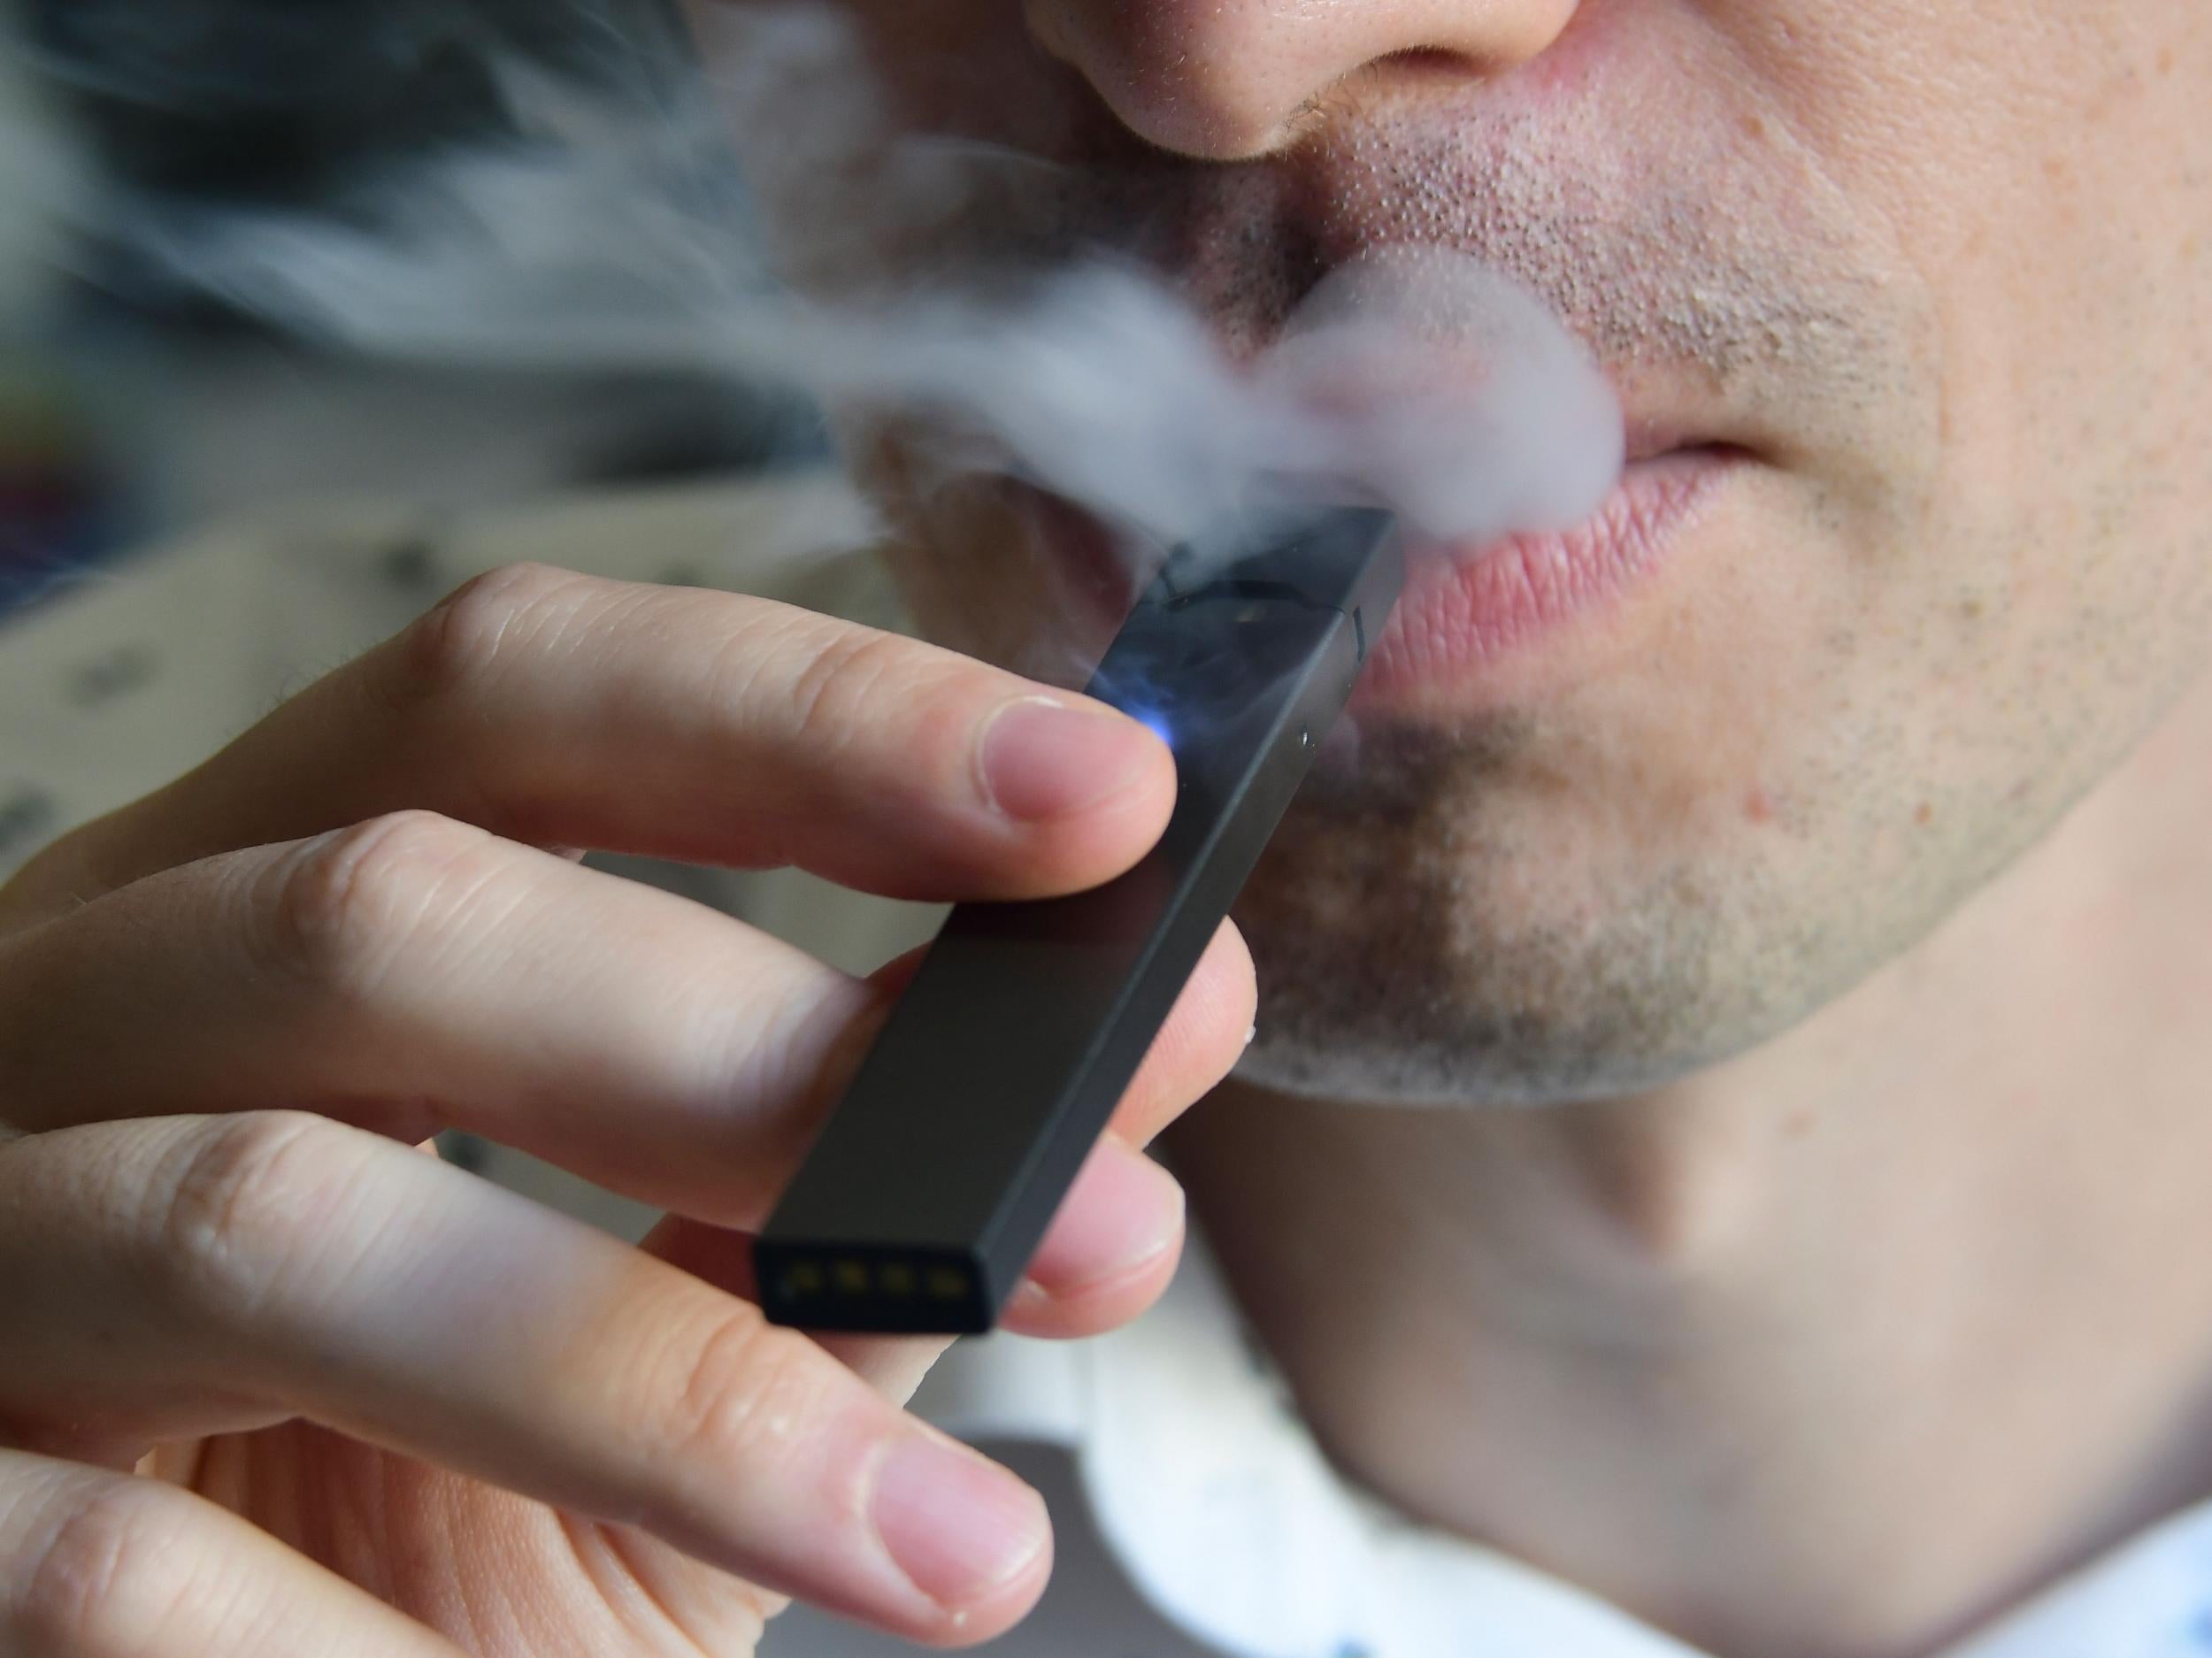 Third person dies from vaping related illness as health officials at Centers for Disease Control and Prevention warn people to stop using e-cigarettes